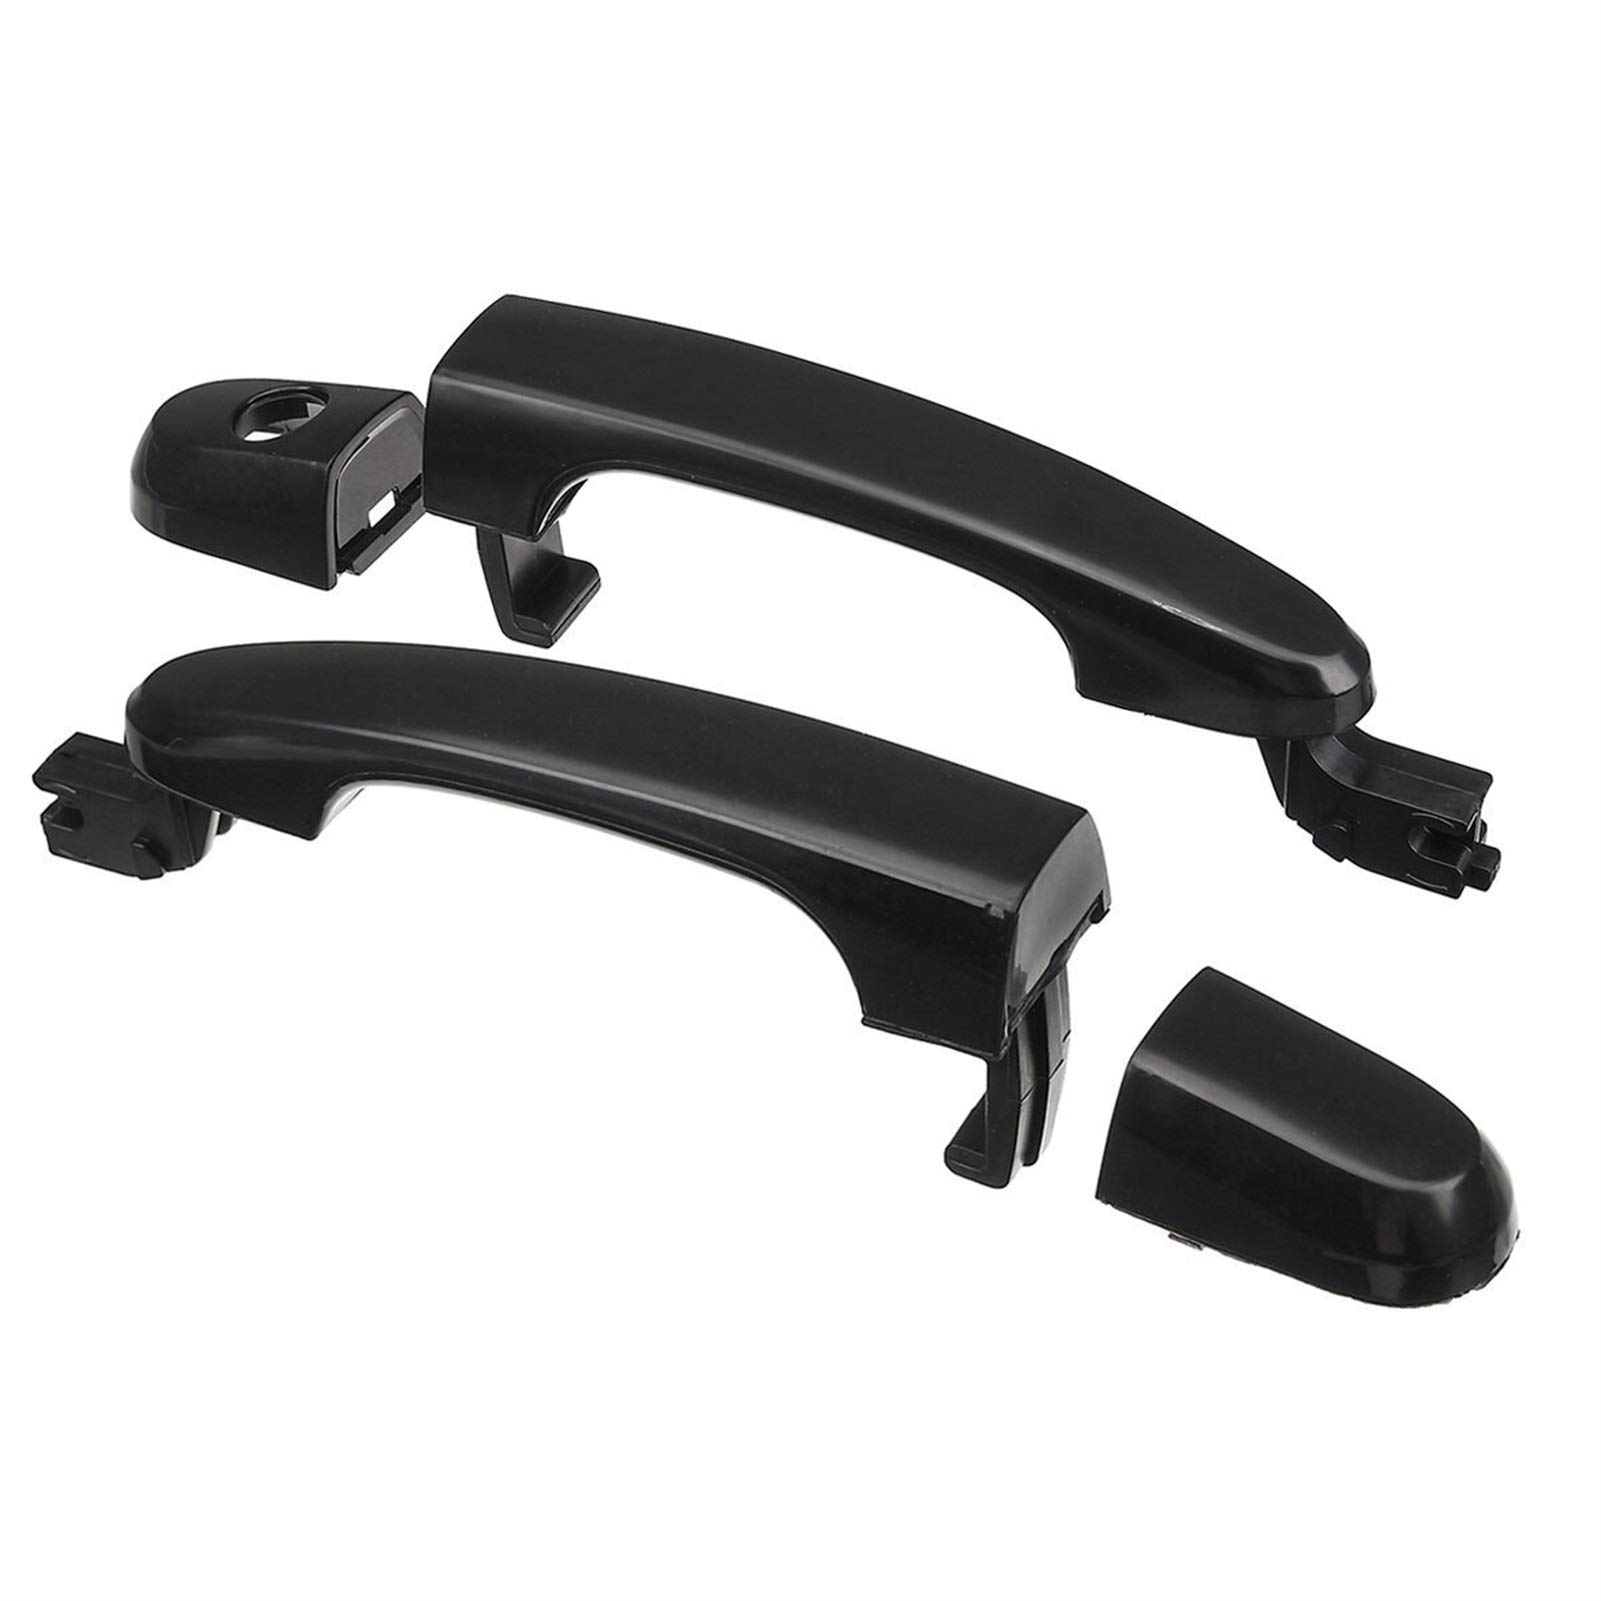 Outer door handle Fit for KIA Sportage 2005 2006 2007 2008 2009 2010 New Exterior Outside Door Handle Front Left/Front Right (Placement on Vehicle : Front Left)